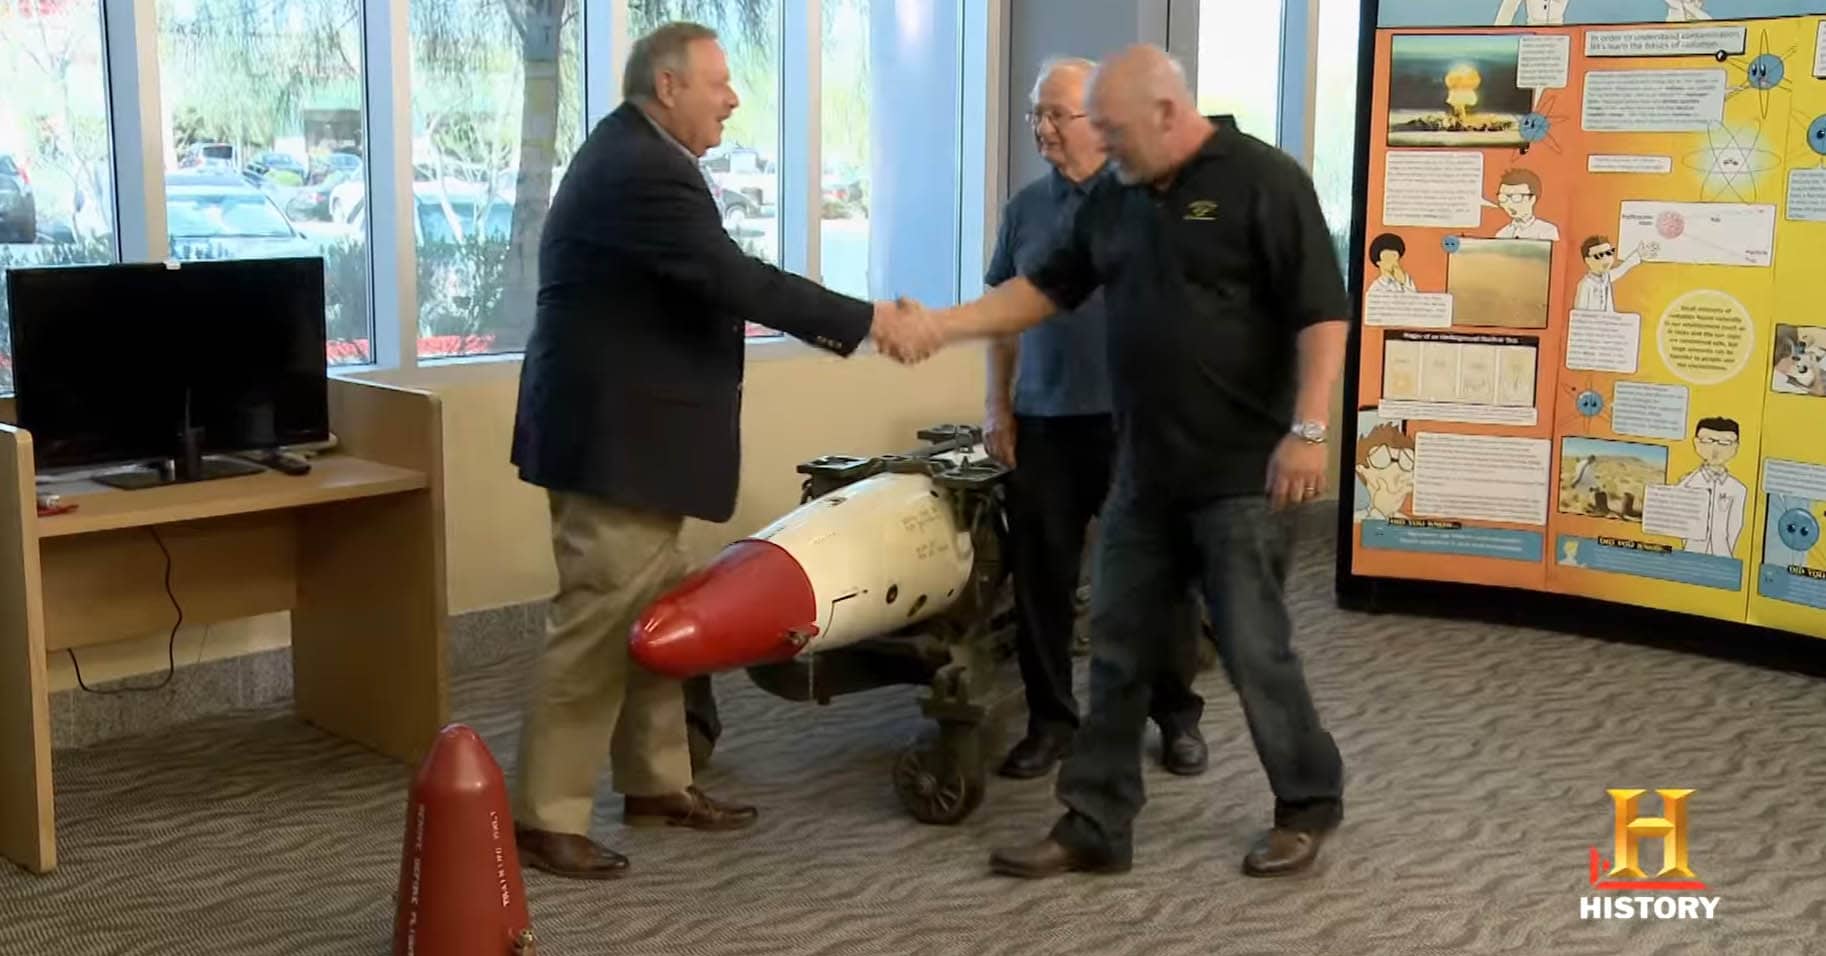 That time Rick from ‘Pawn Stars’ purchased a nuclear weapon on the show